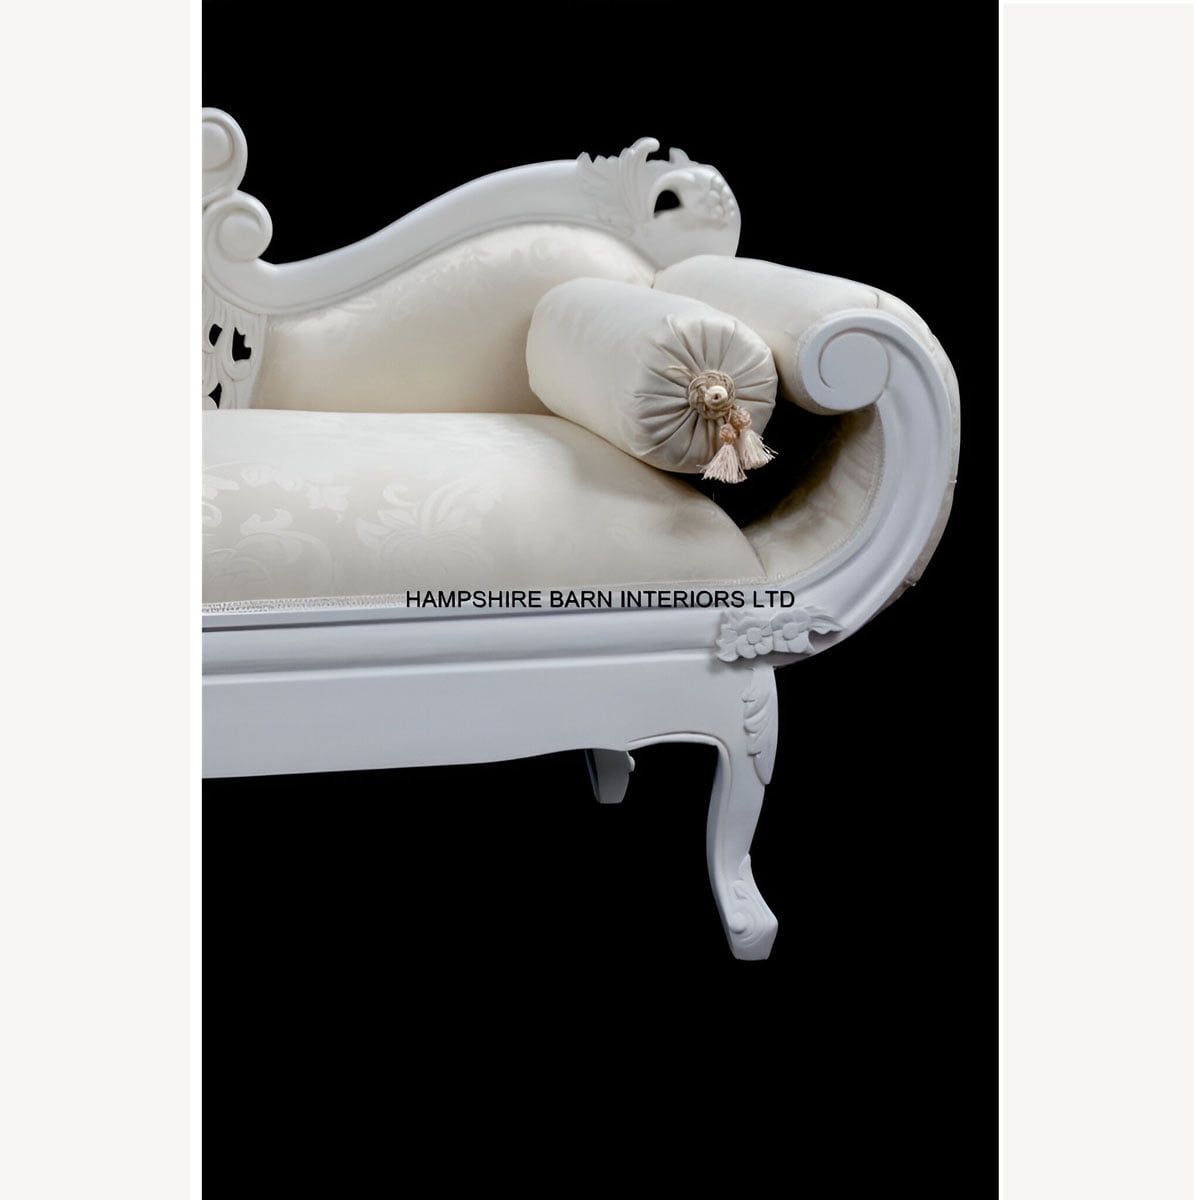 A French Chateau Style Ornate Amberley Medium Chaise Longue In Antique White And Ivory Fabric 4 - Hampshire Barn Interiors - A French Chateau Style Ornate Amberley Medium Chaise Longue In Antique White And Ivory Fabric -